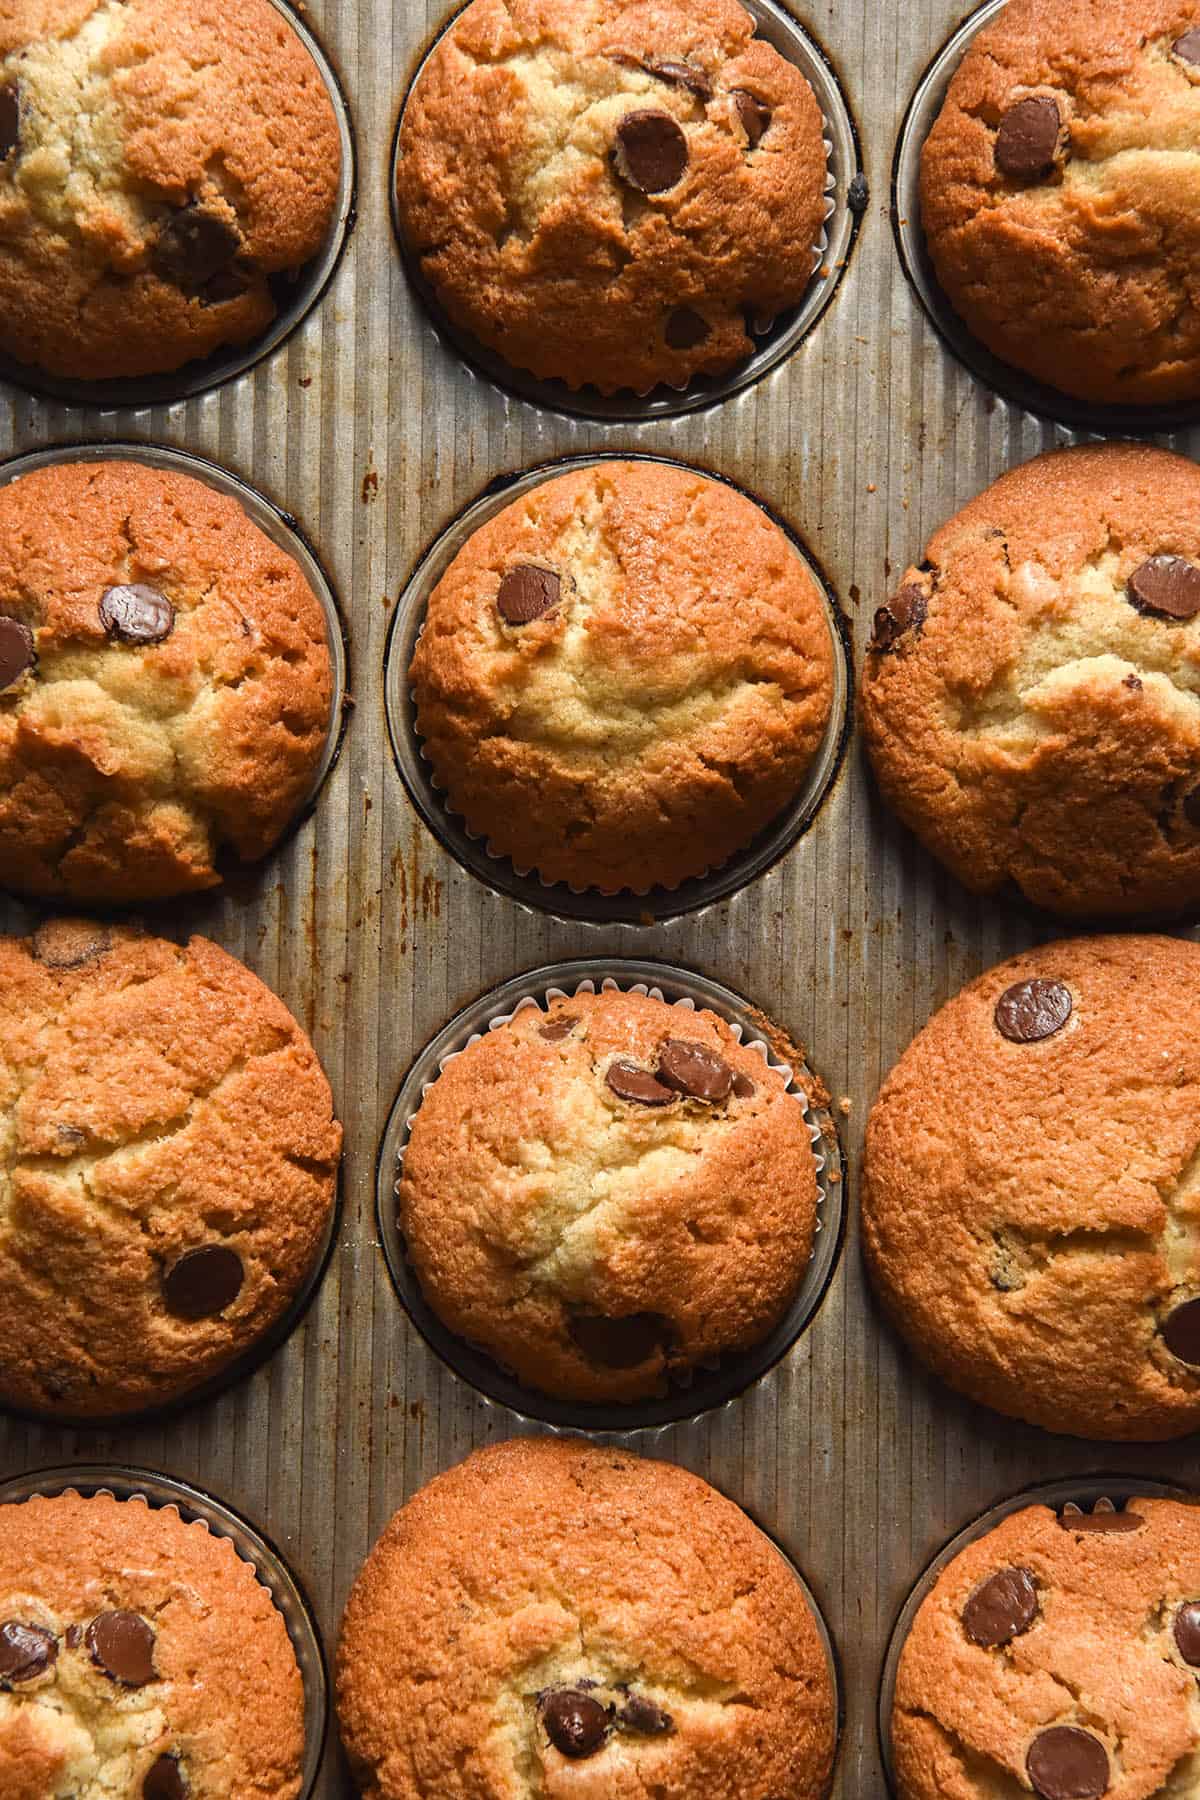 An aerial view of a muffin tray filled with gluten free chocolate chip muffins. The muffin tops are golden brown and studded with extra chocolate chips